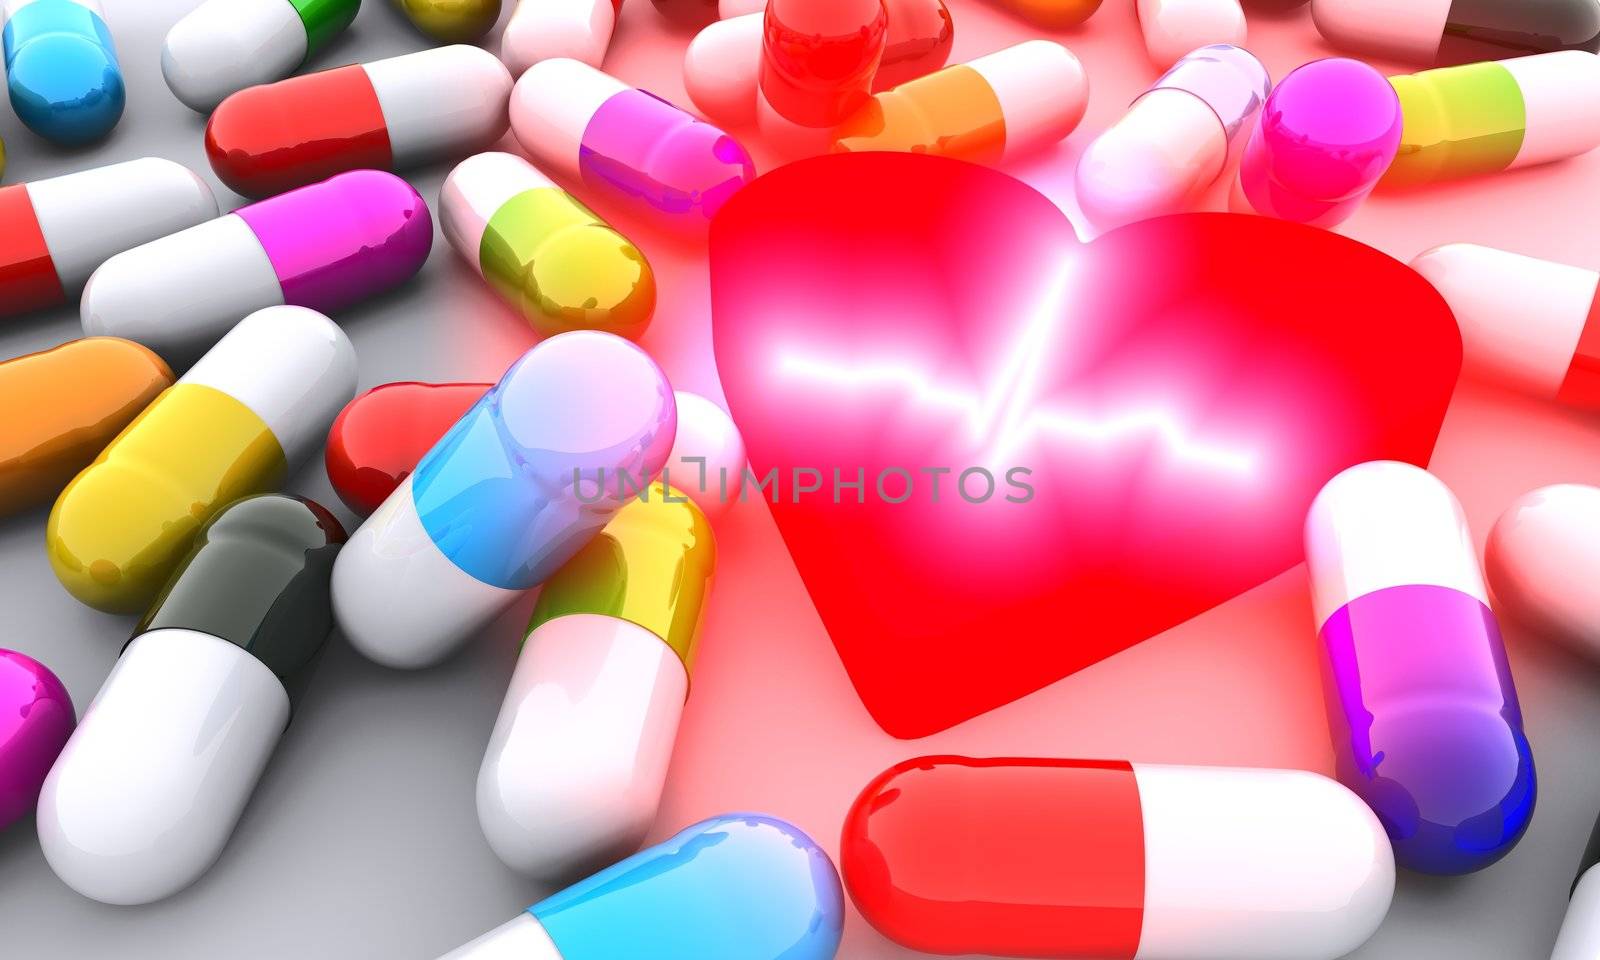 Concept of many colorful pills near symbolic red heart with schematic representation of normal (healthy) electrocardiogram wave intensively glowing with white color. Scene is rendered and isolated on white background.